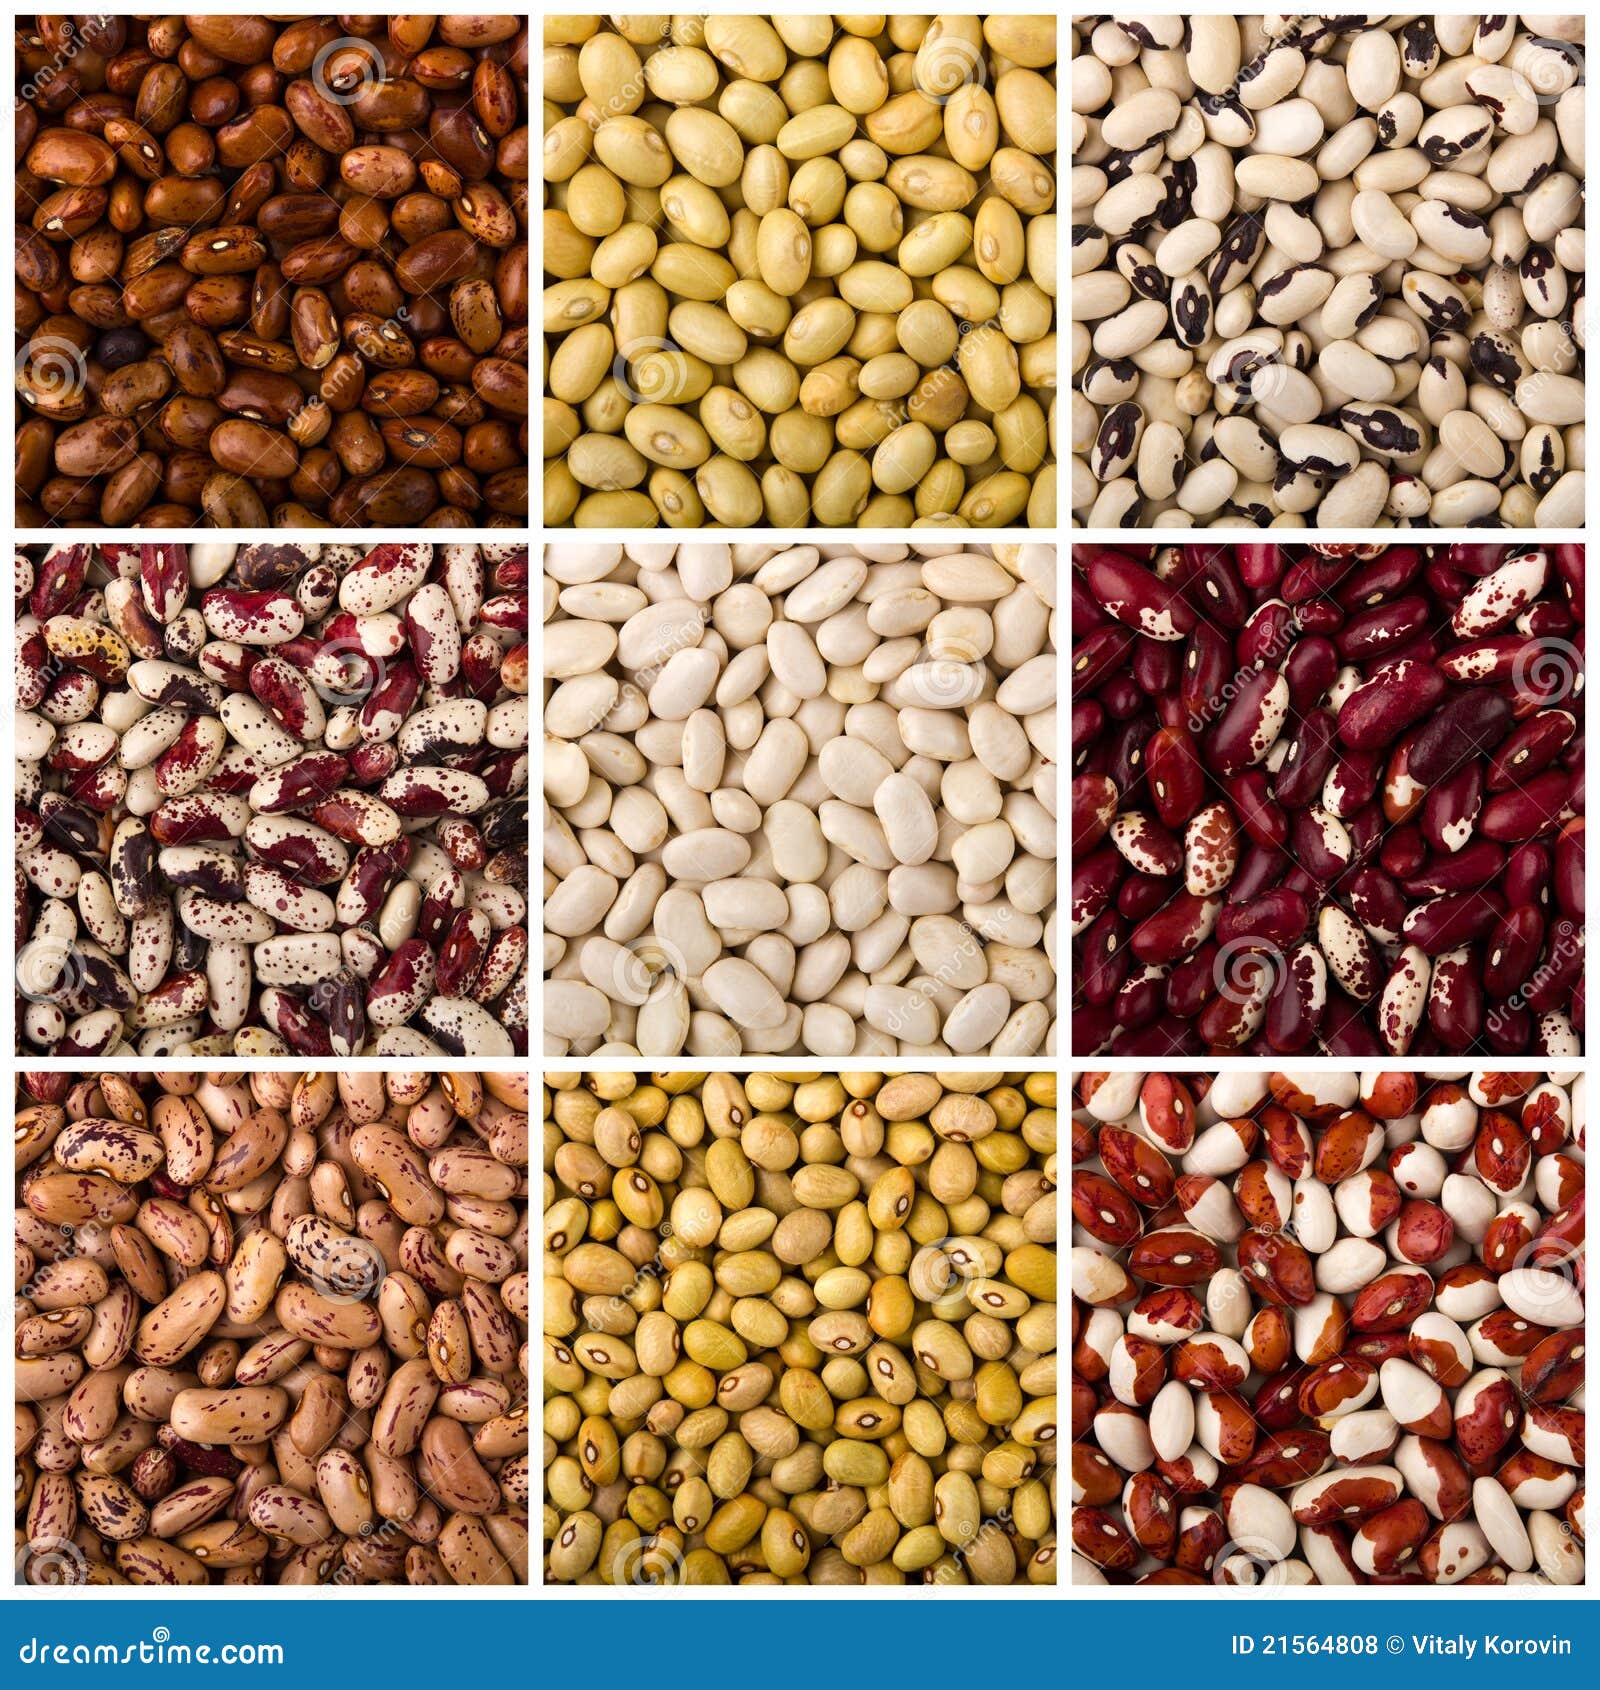 Kidney Beans stock photo. Image of assortment, isolated